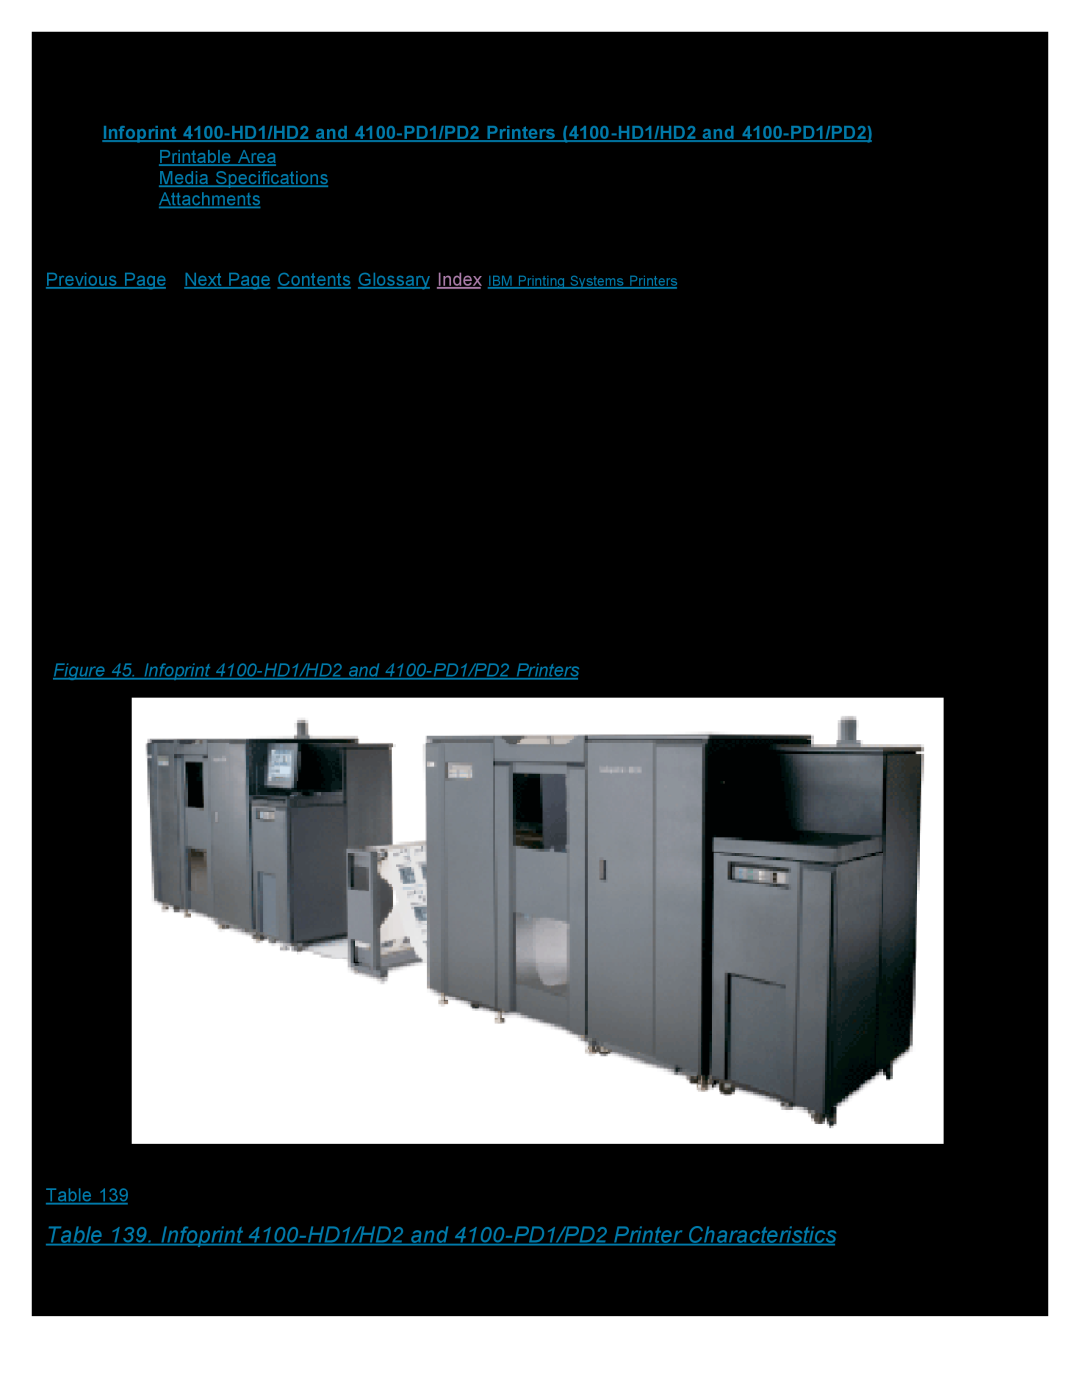 IBM specifications Infoprint 4100-HD1/HD2 and 4100-PD1/PD2 Printers, Table Of Contents 